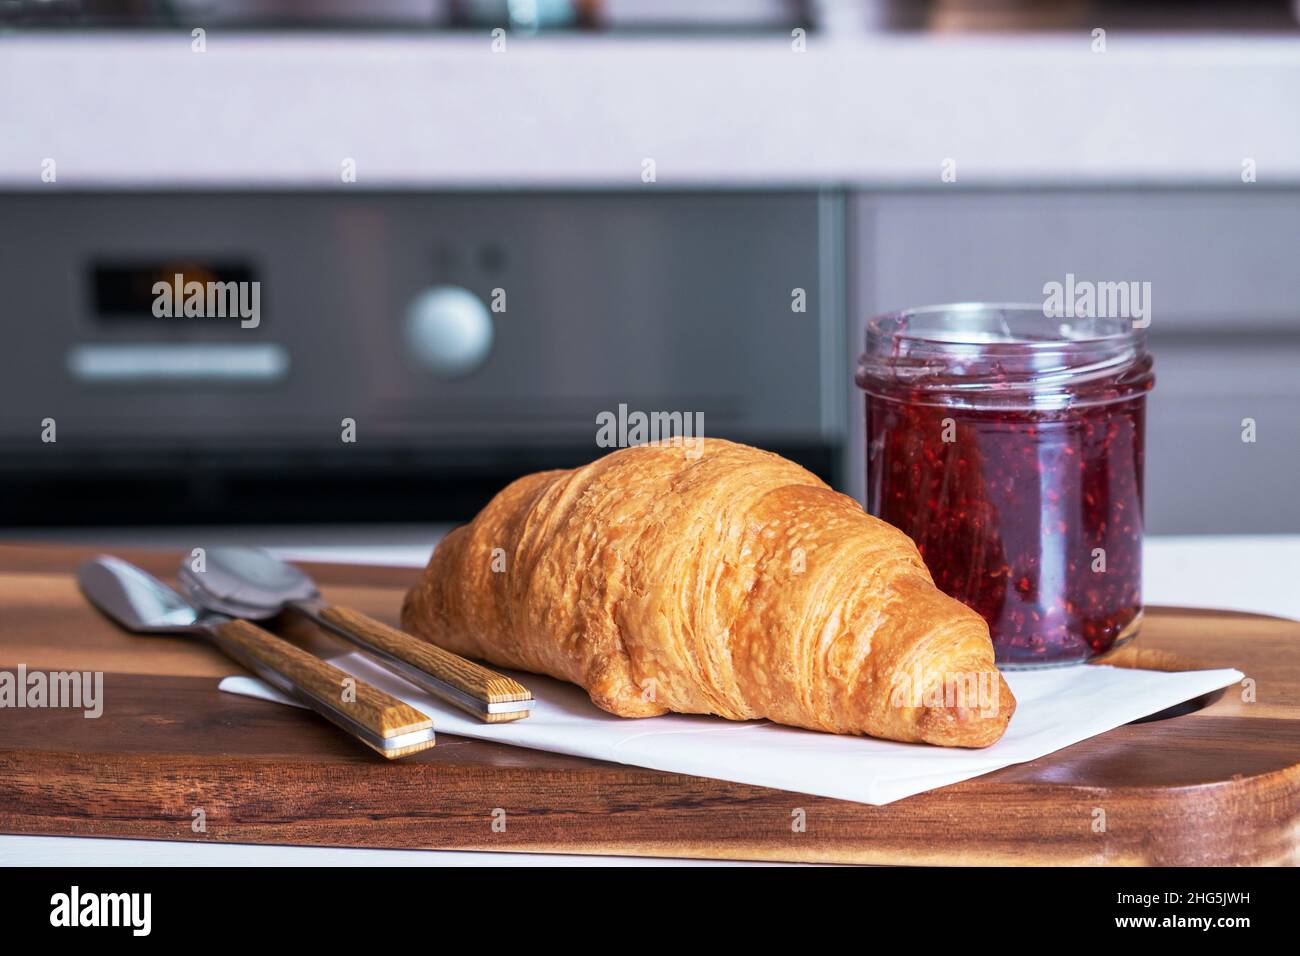 Croissant for breakfast with jam Stock Photo